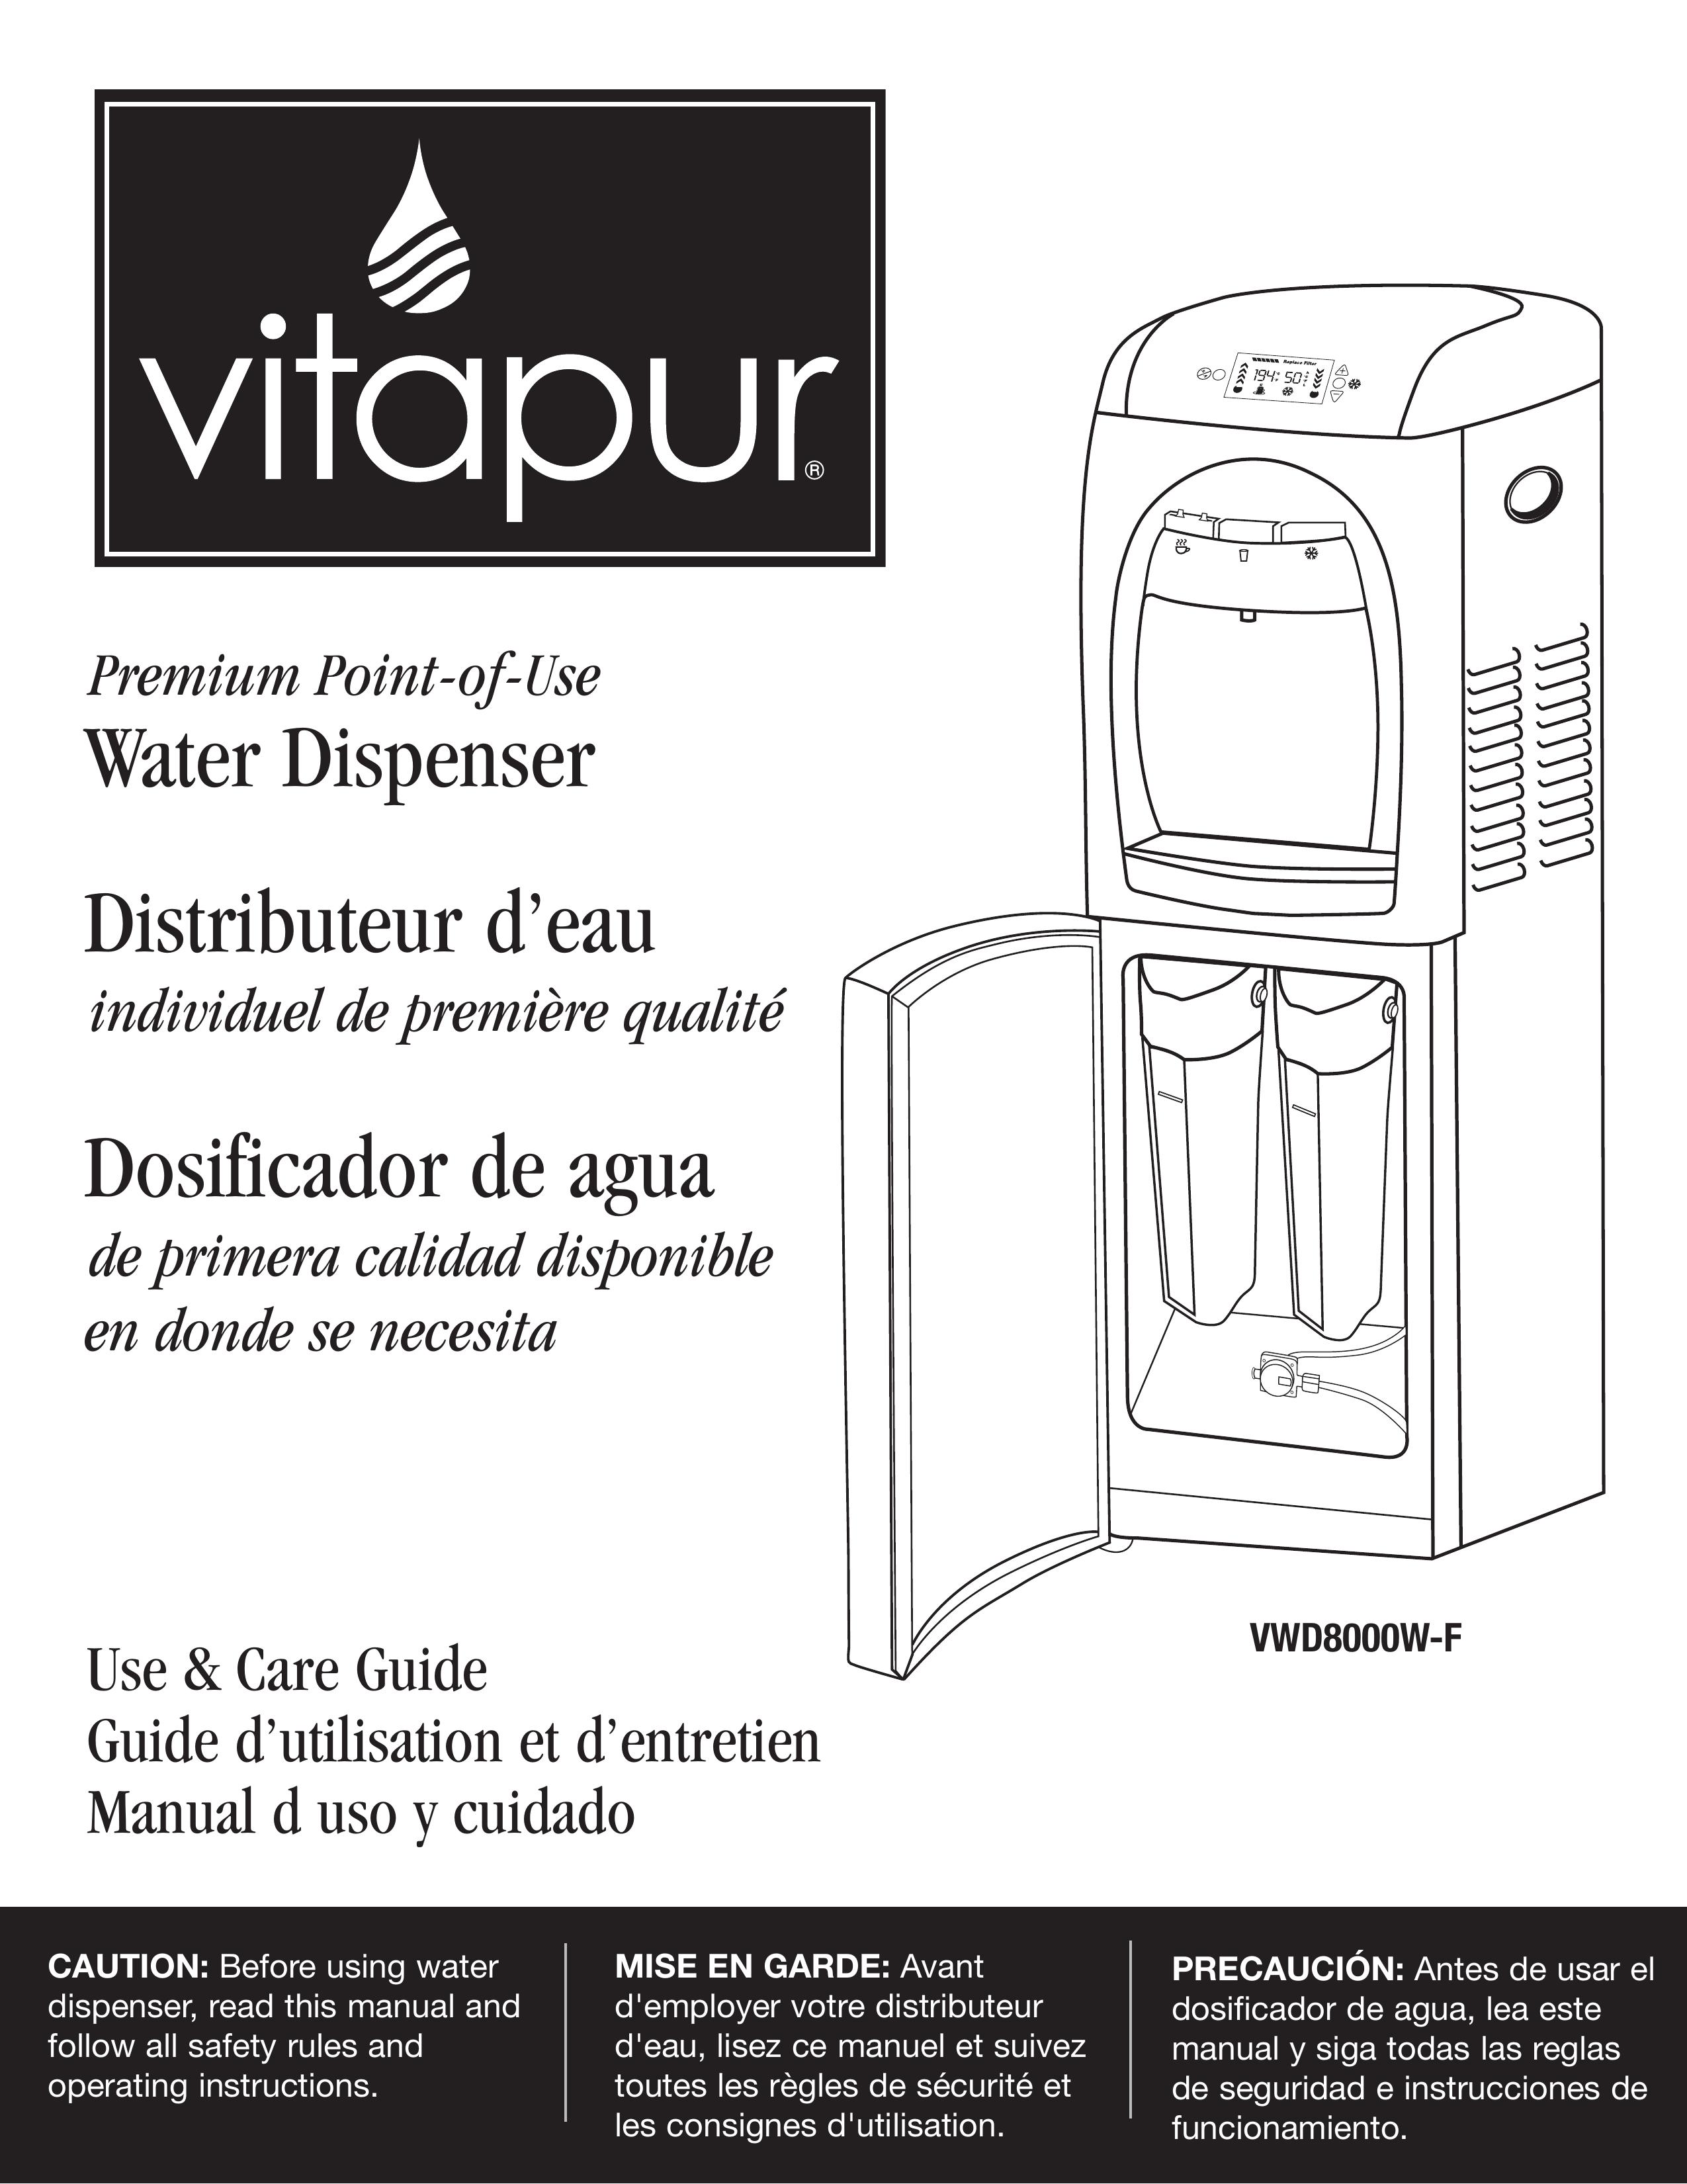 Greenway Home Products VWD8000W-F Water Dispenser User Manual